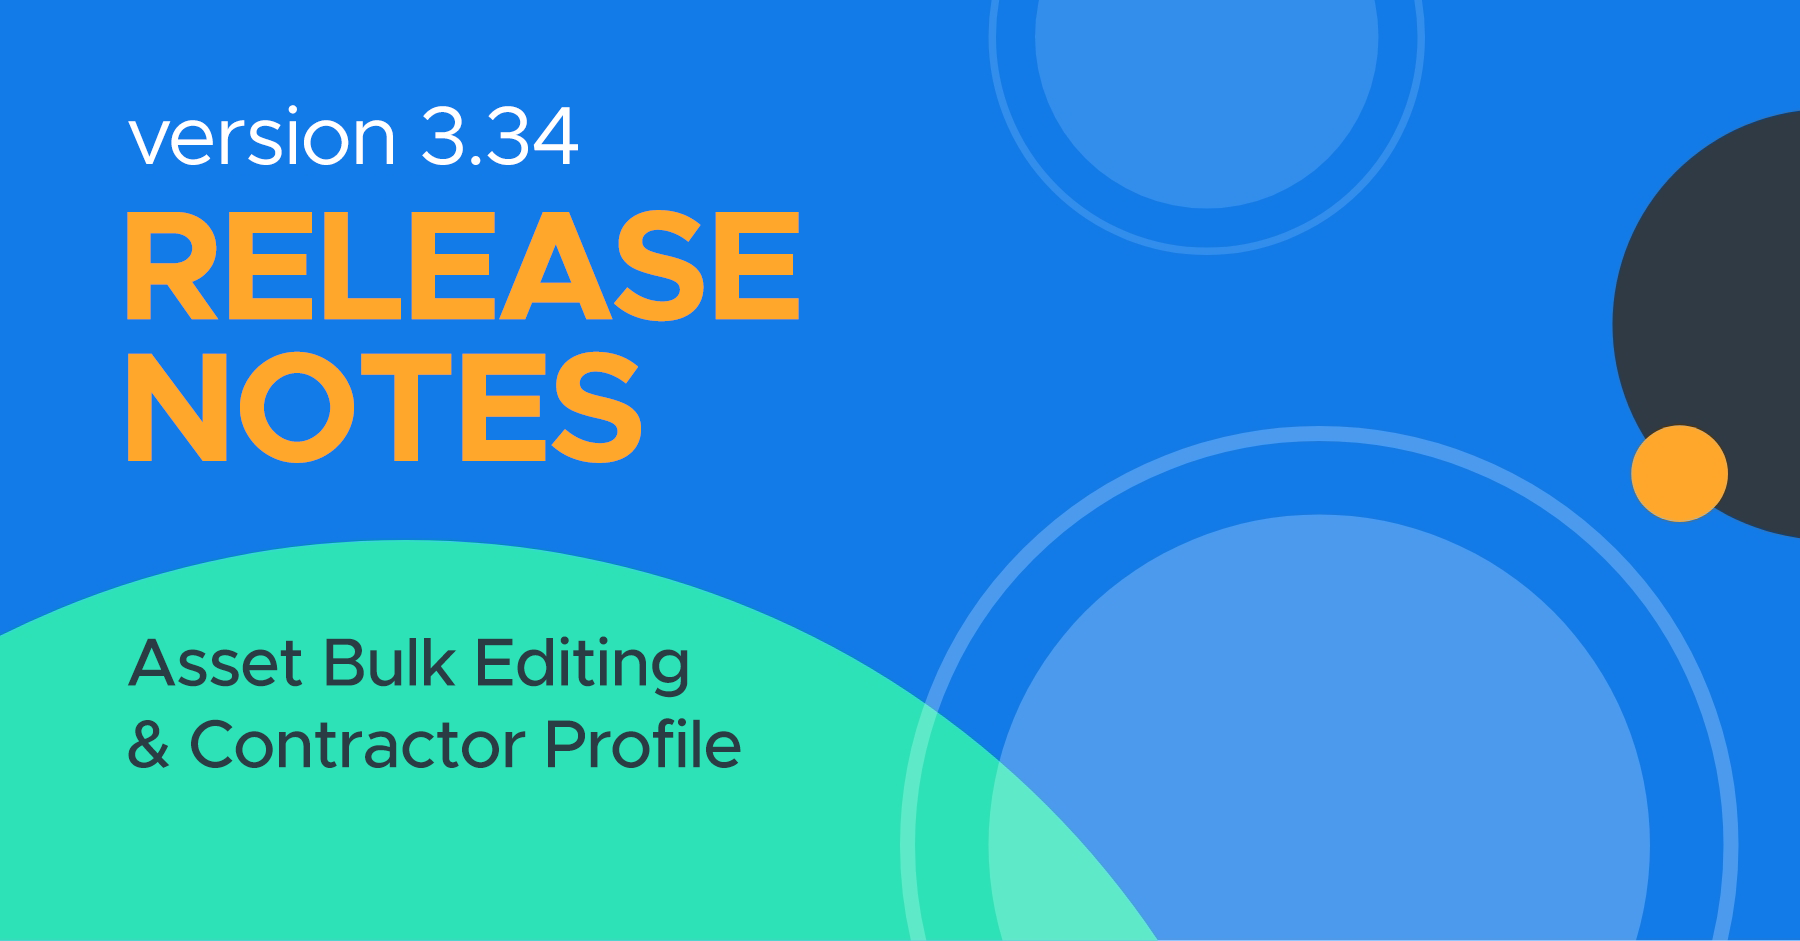 What's new? Version 3.34 release highlights